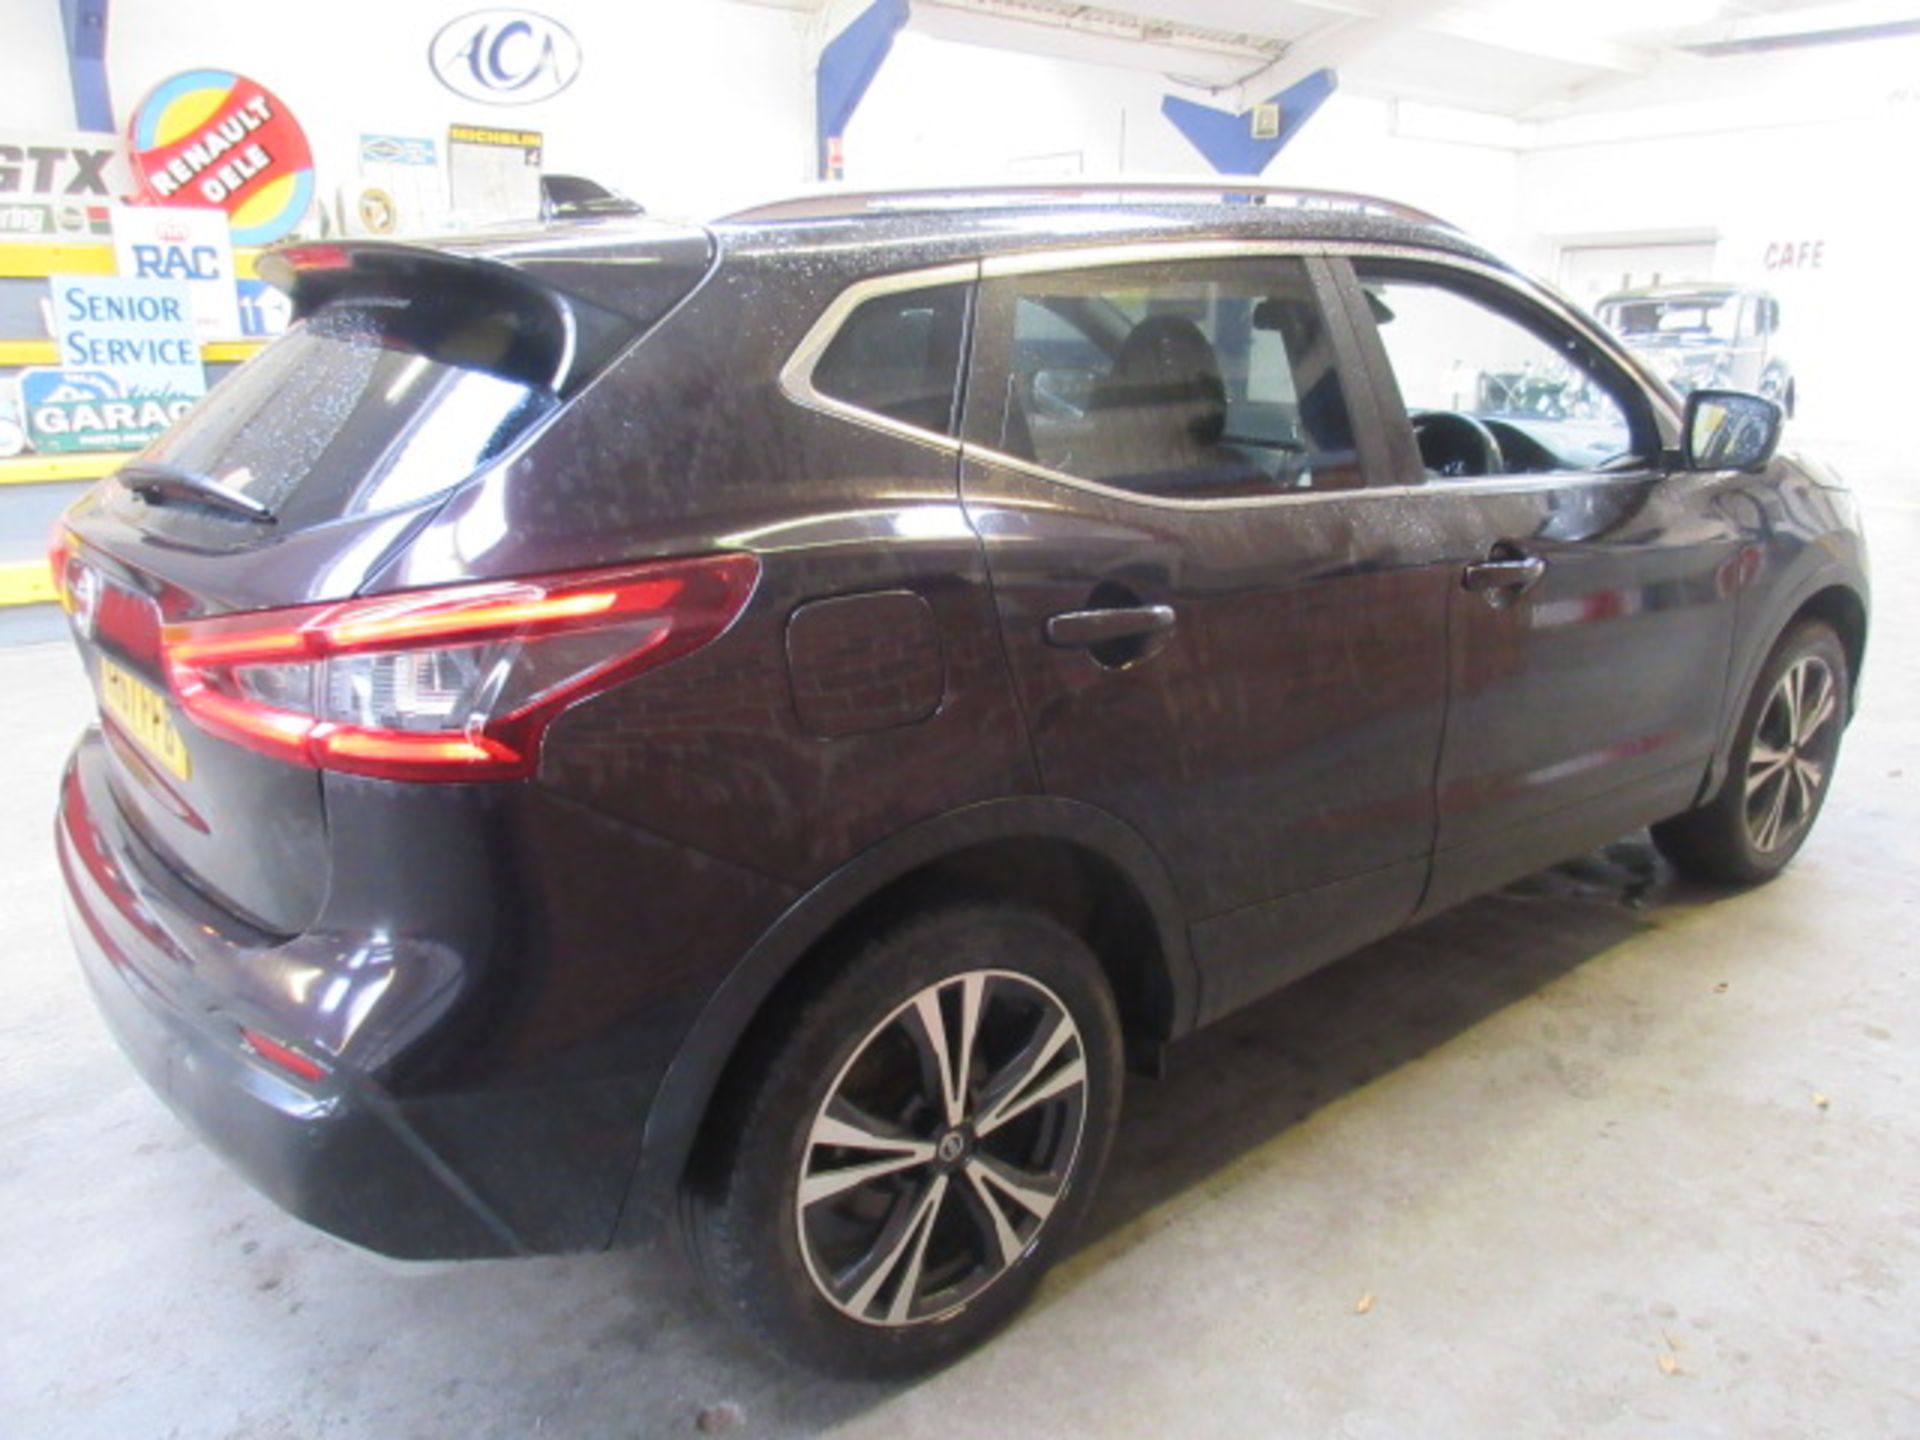 67 17 Nissan Qashqai N-Connecta DCI - Image 3 of 14